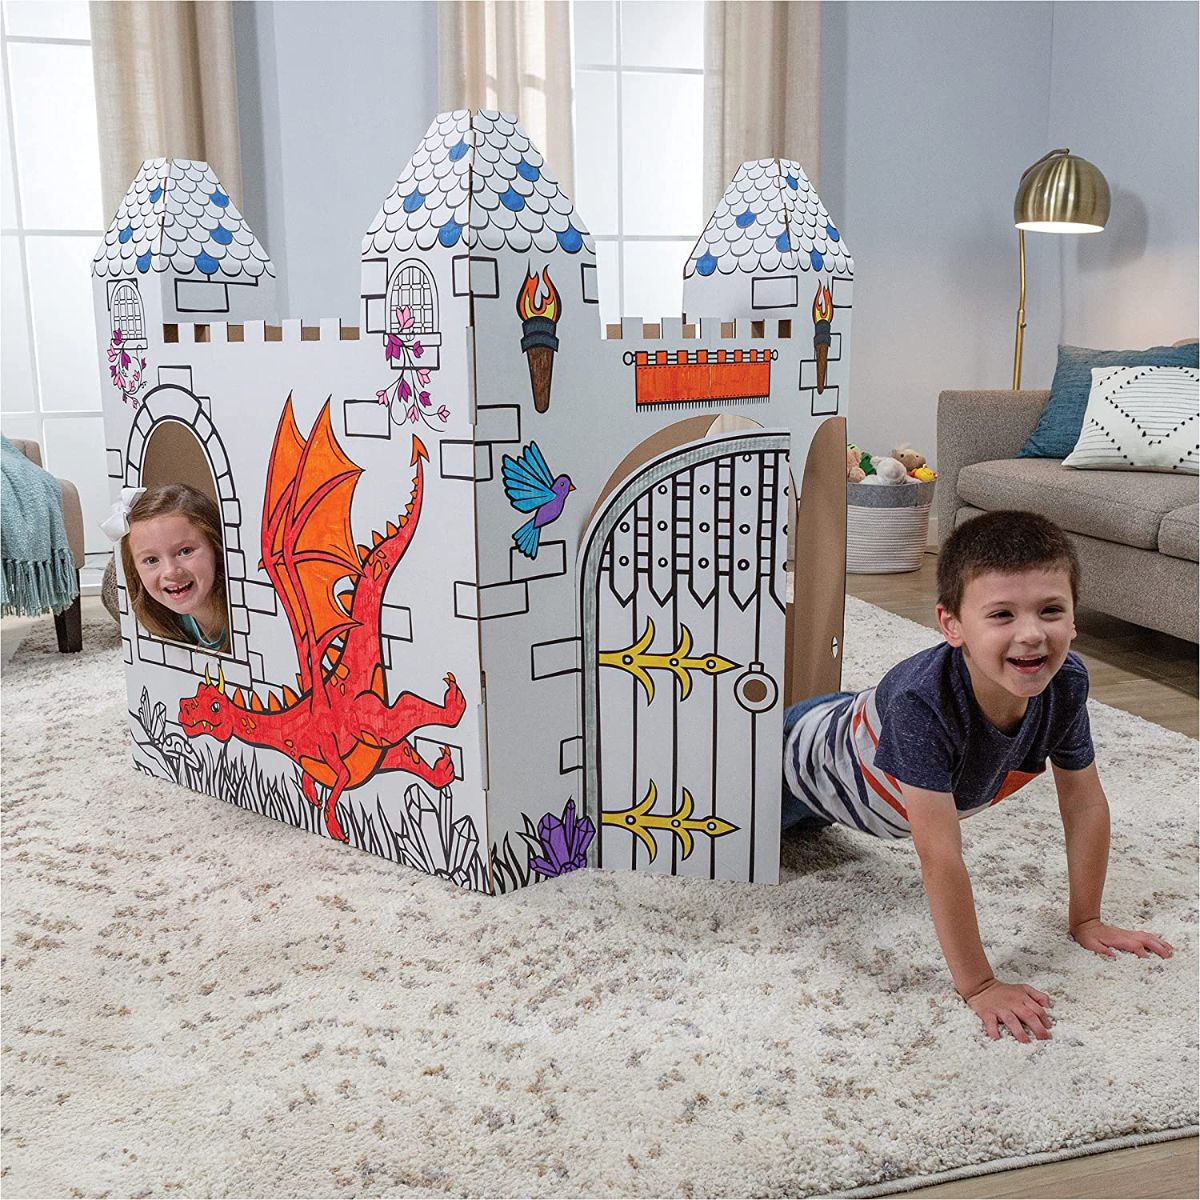 Two kids playing in a cardboard castle.